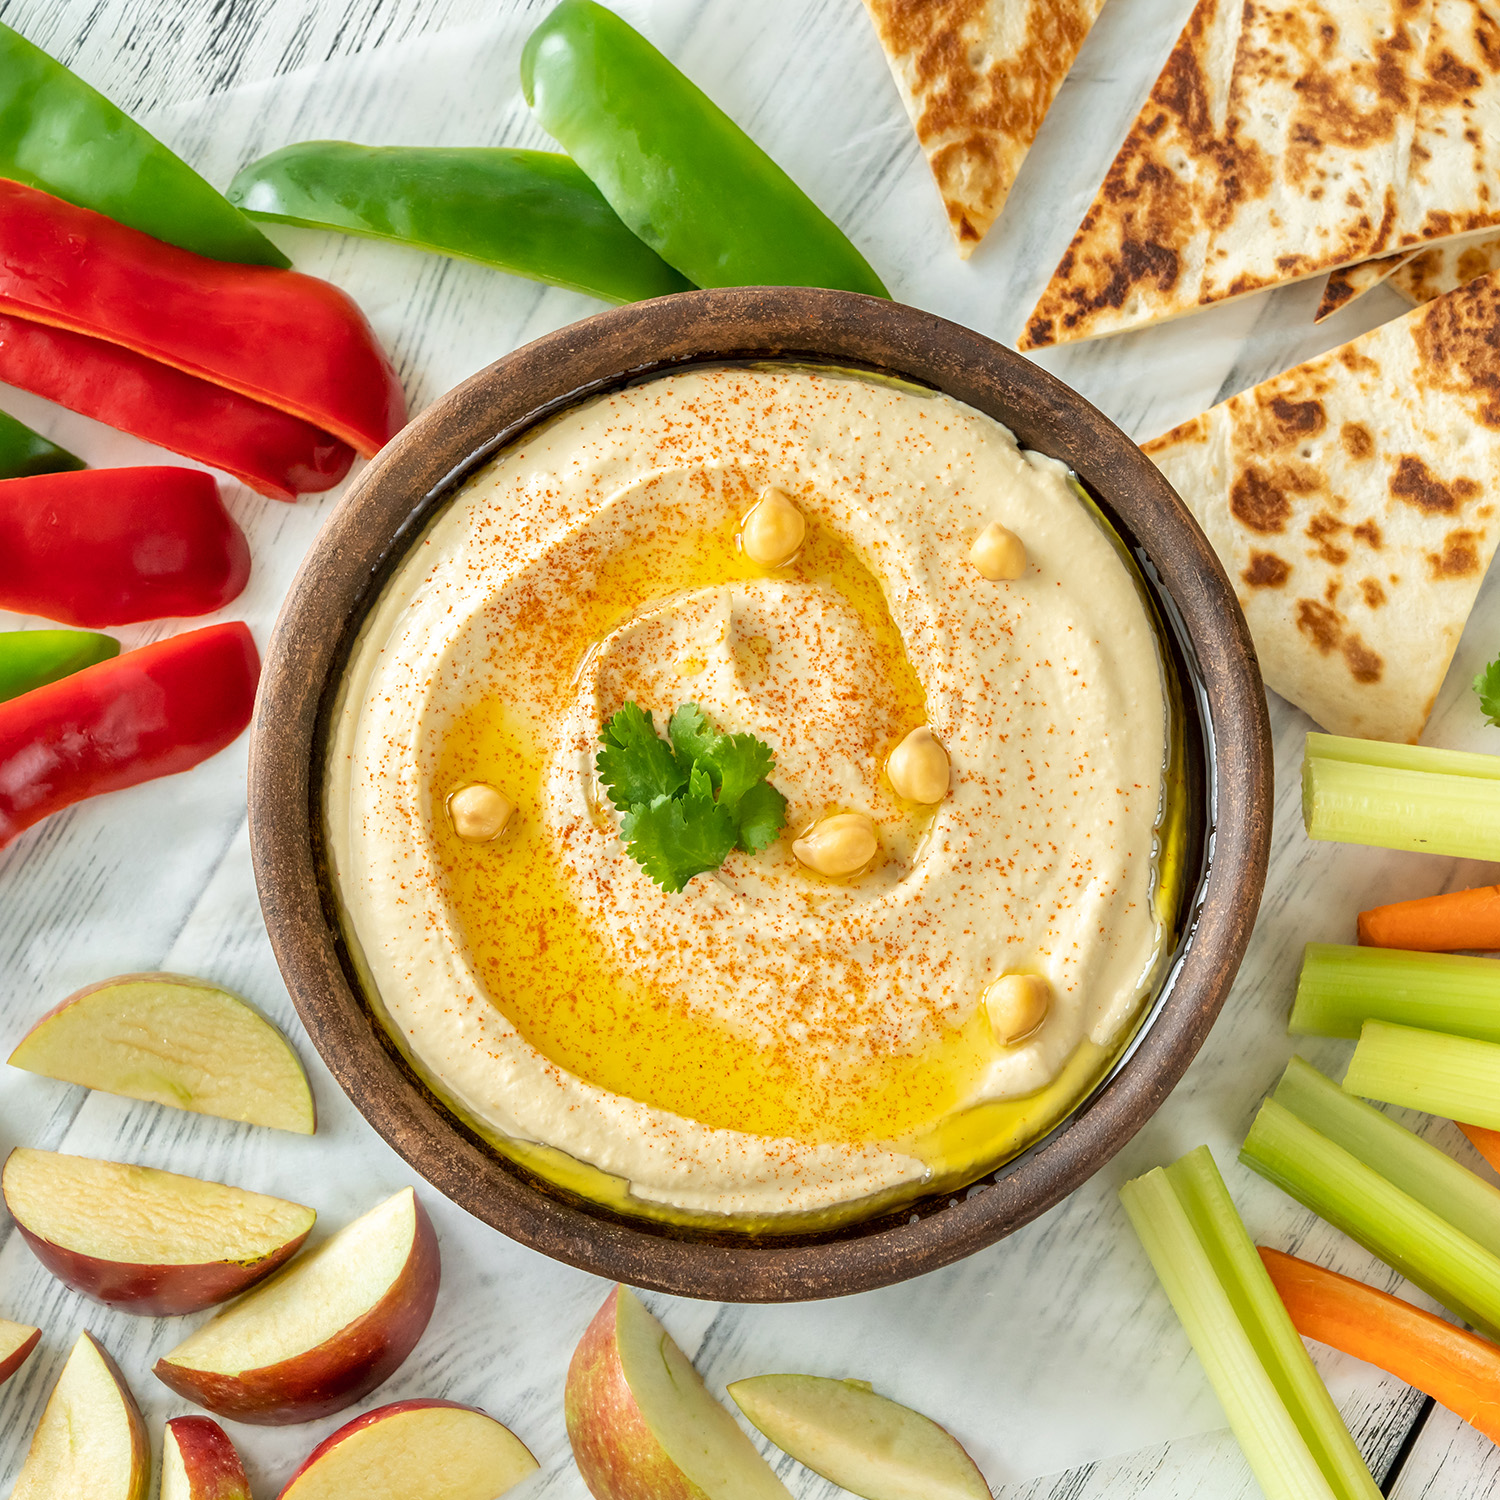 Hummus With Vegetables, Fruit, and Bread